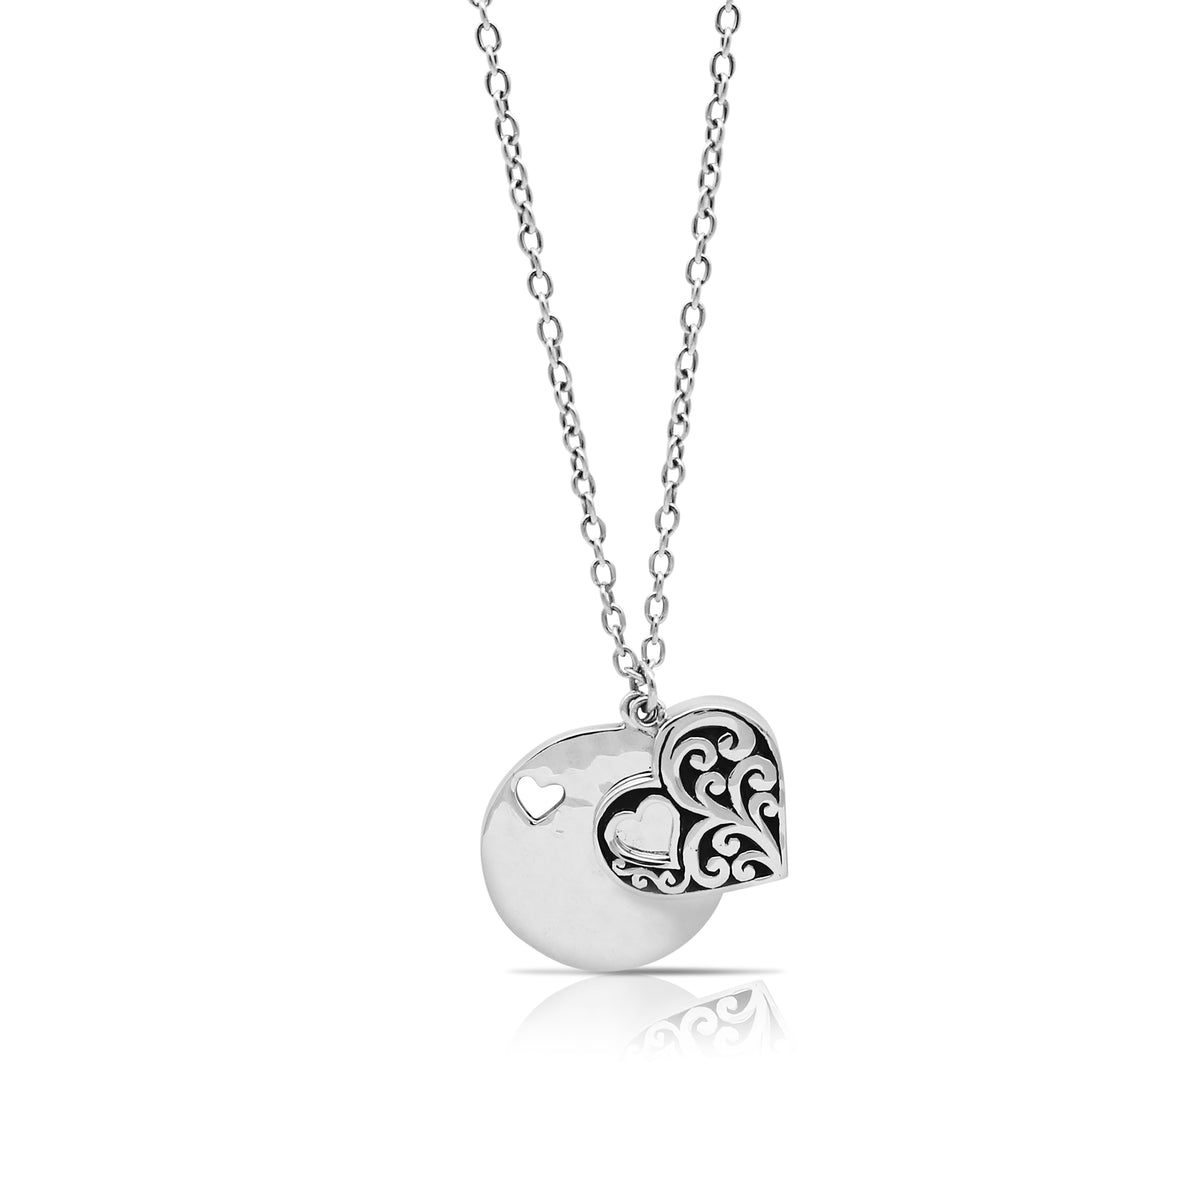 LH Classic Scroll Heart-Shaped with Round Hammered Pendant (20mm) Necklace 19"